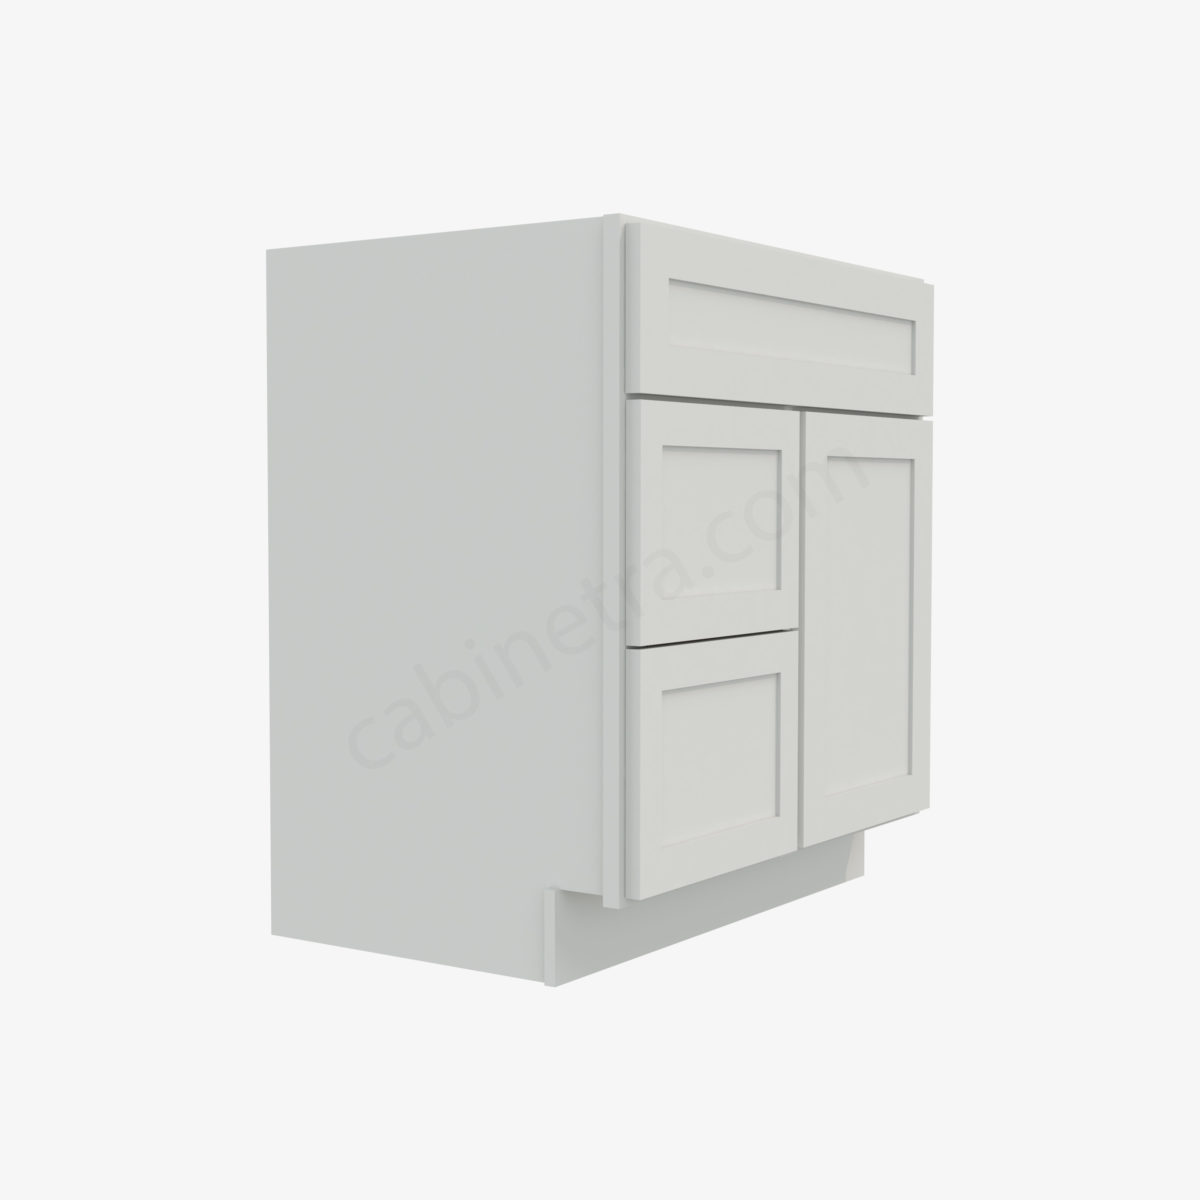 AW S3021DL 34 4 Forevermark Ice White Shaker Cabinetra scaled